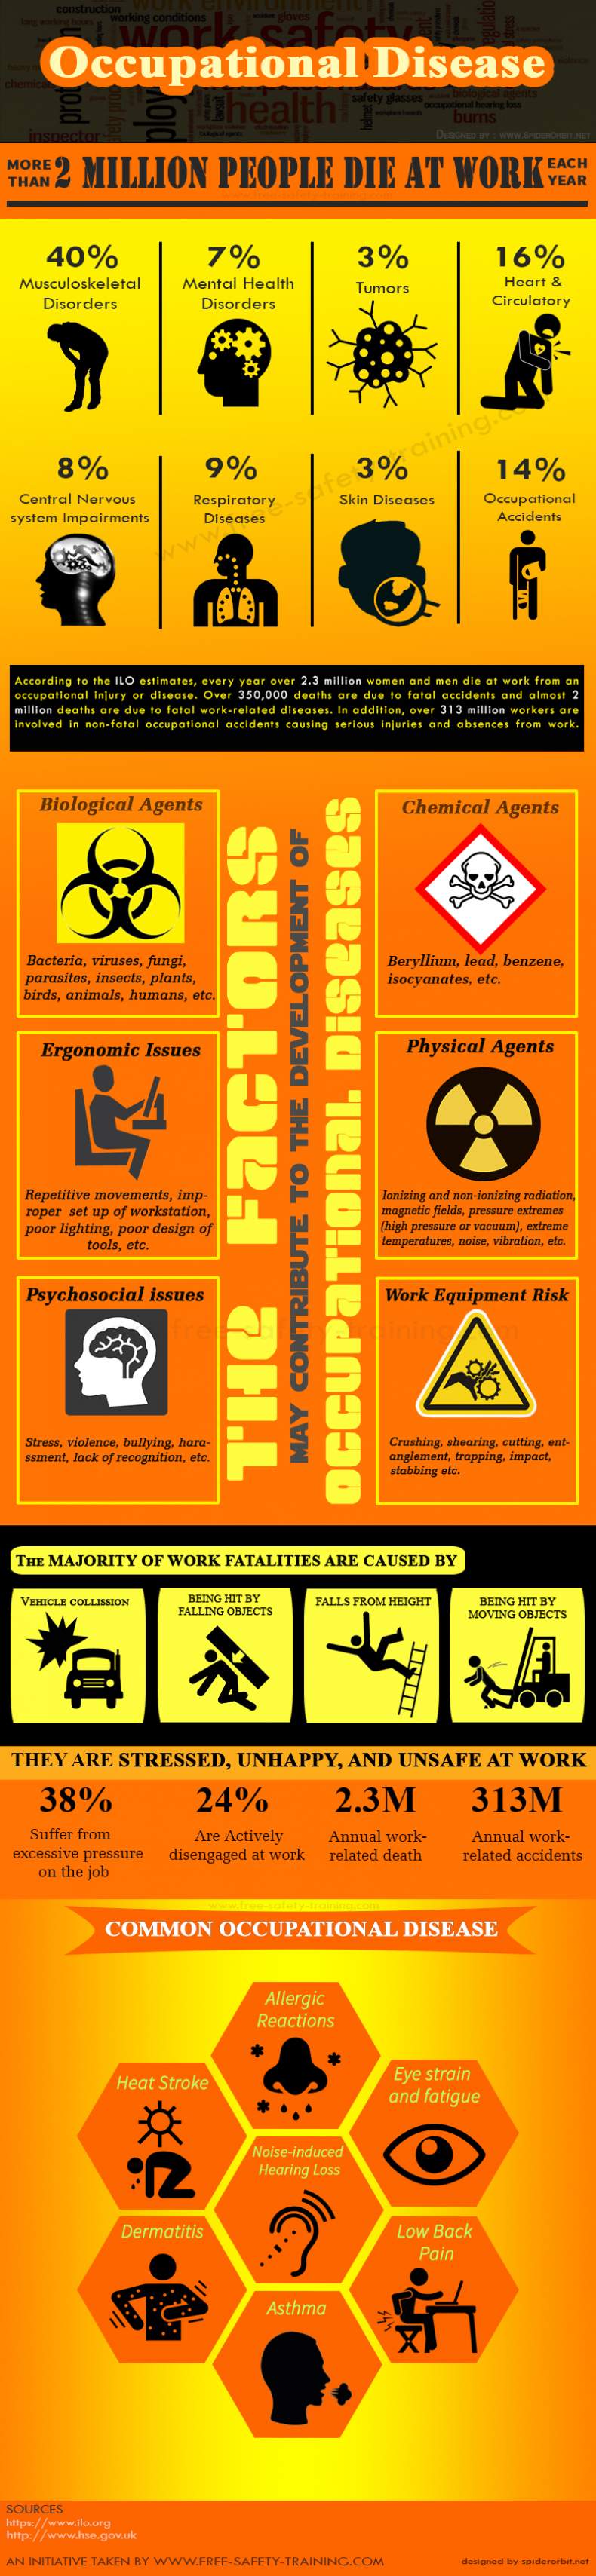 Accidents in Workplace and Occupational Disease